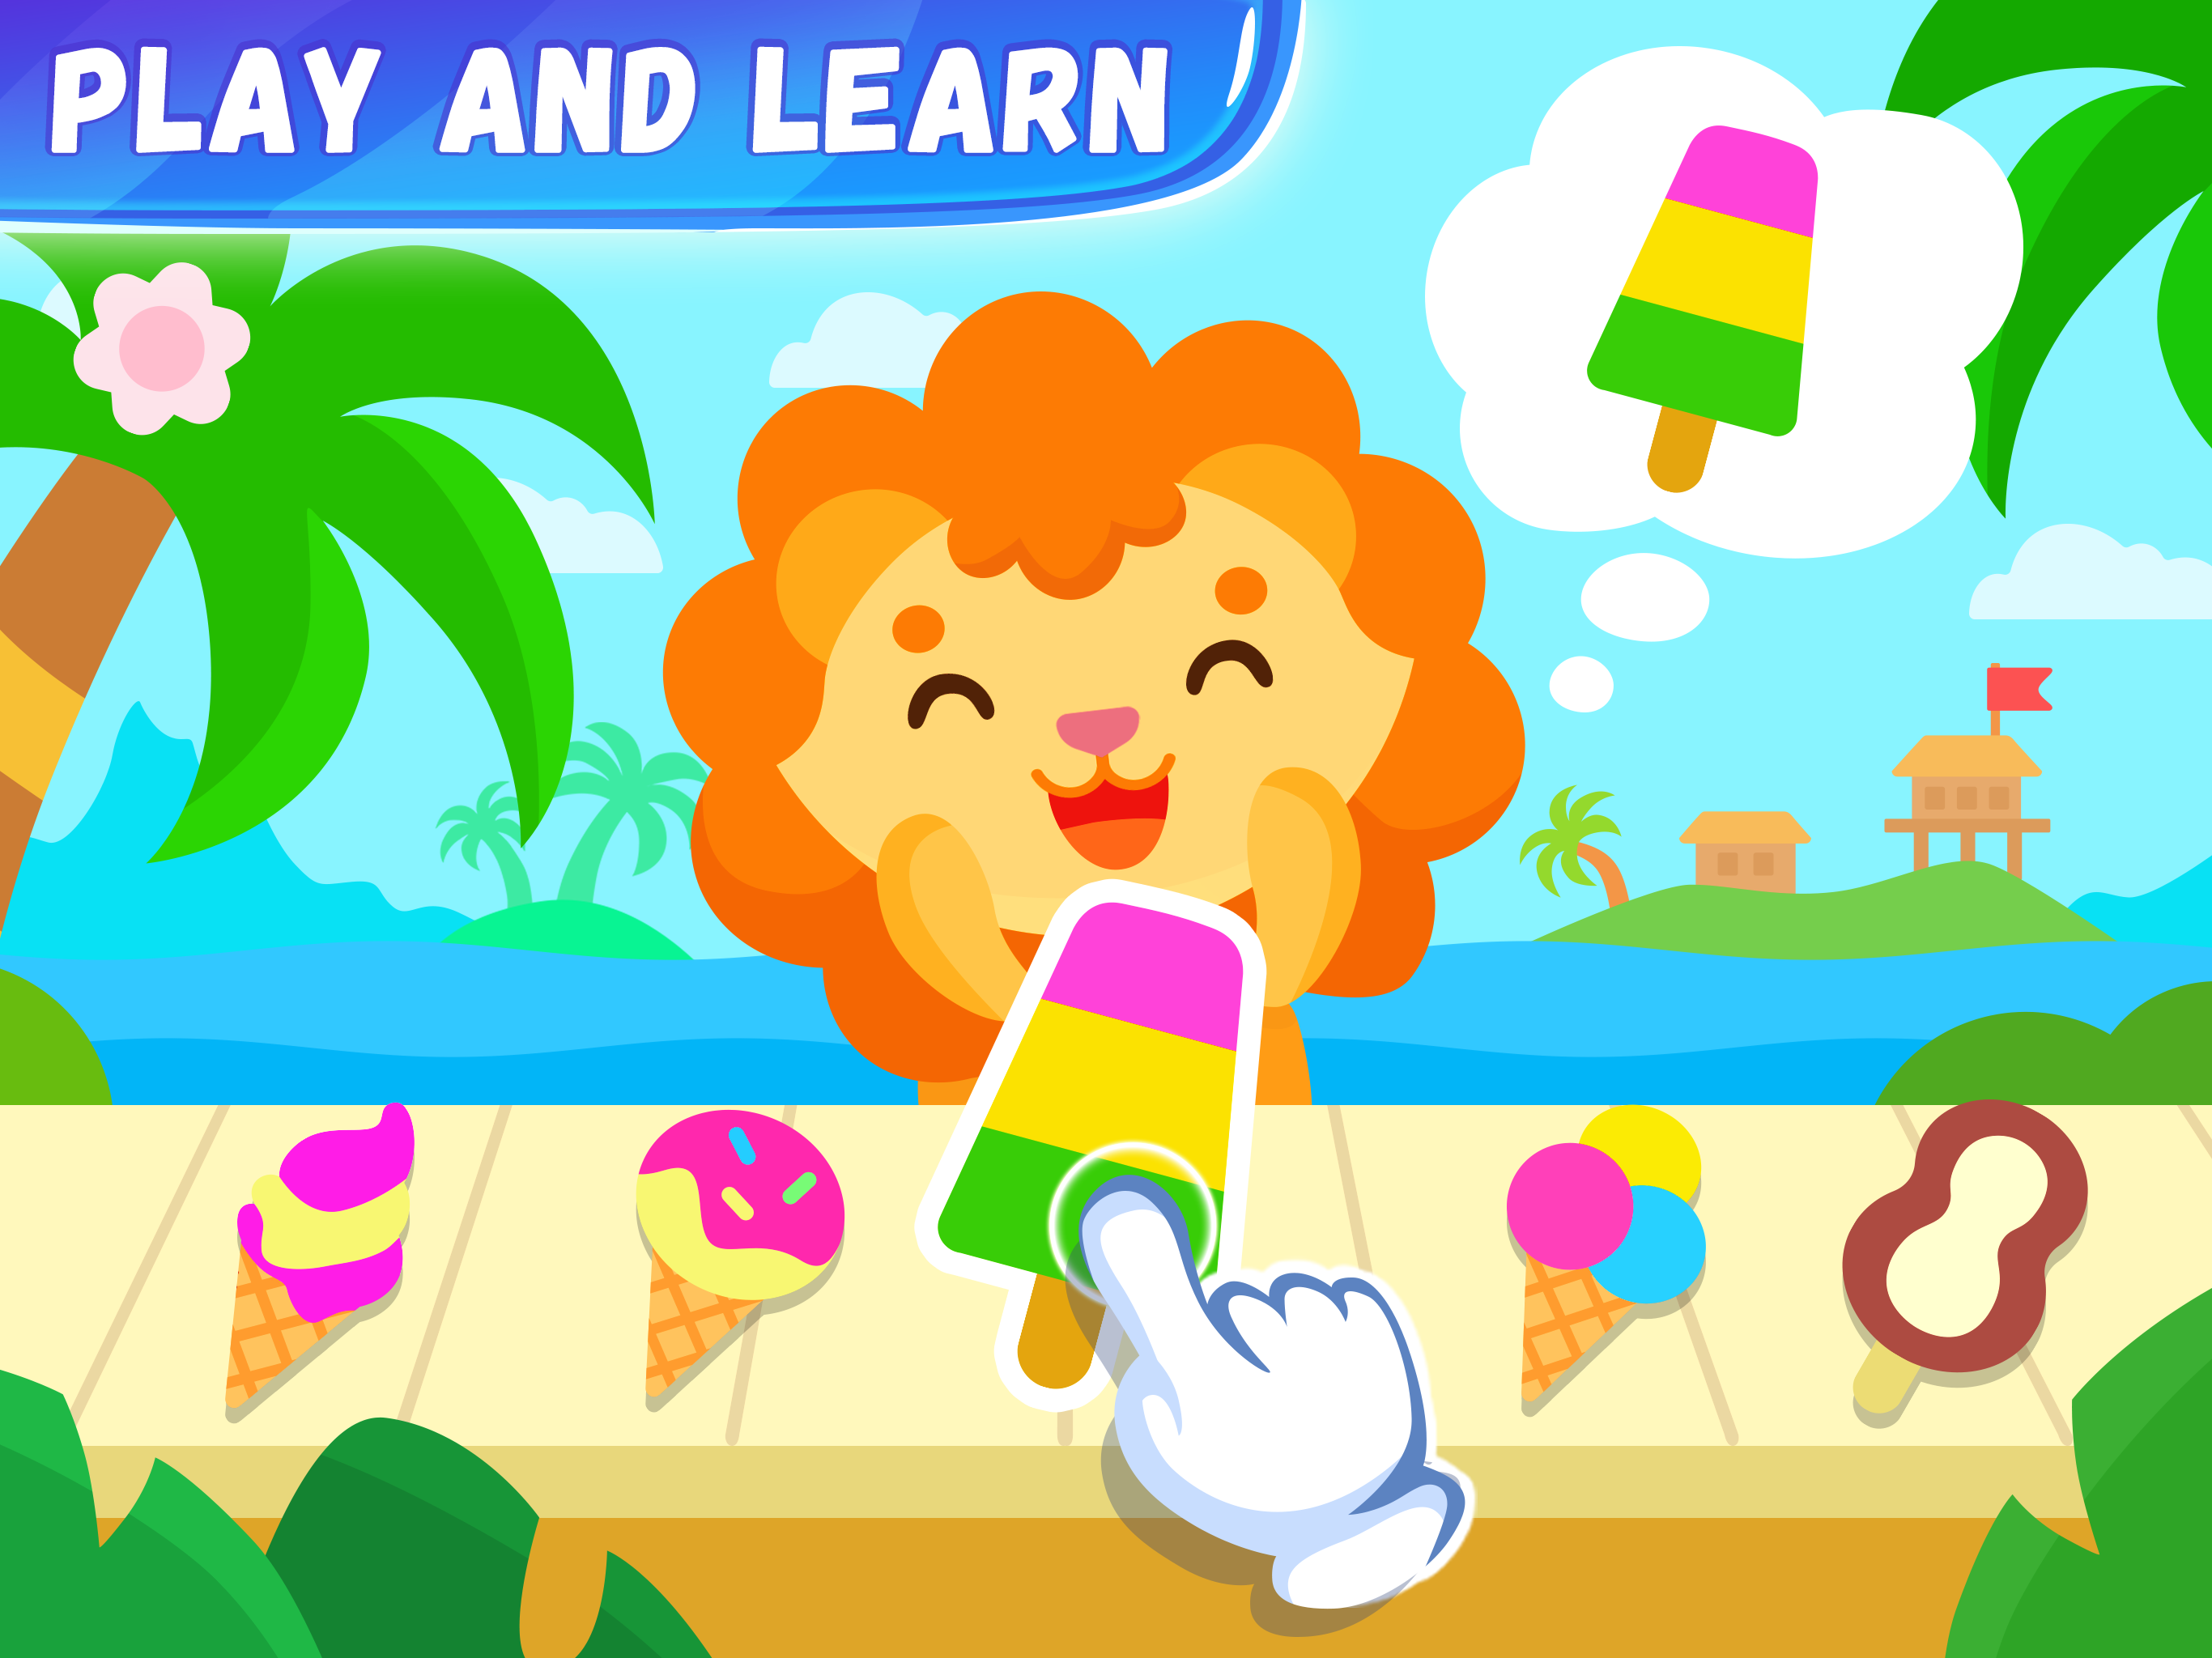 Games for 3 year olds online → Computer games for 3 year olds → …